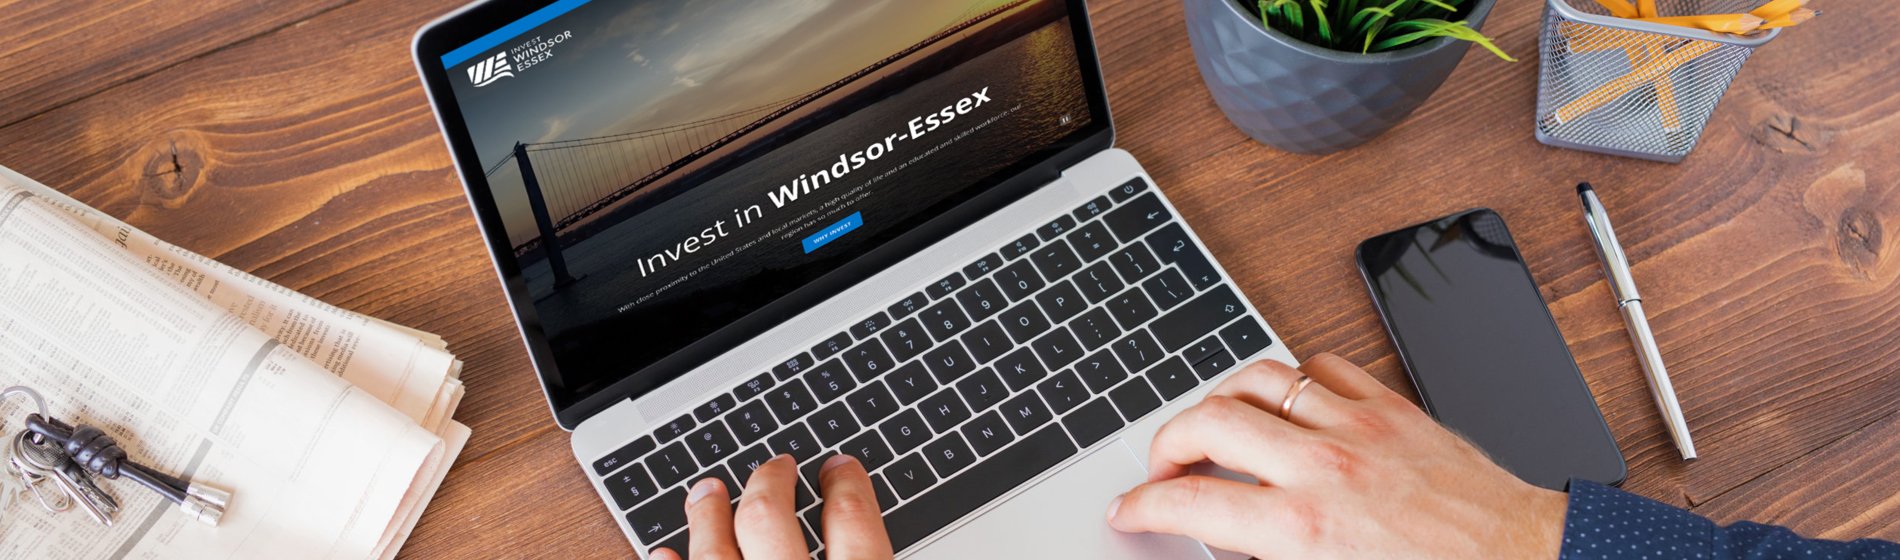 Person browsing Invest Windsor-Essex website on laptop